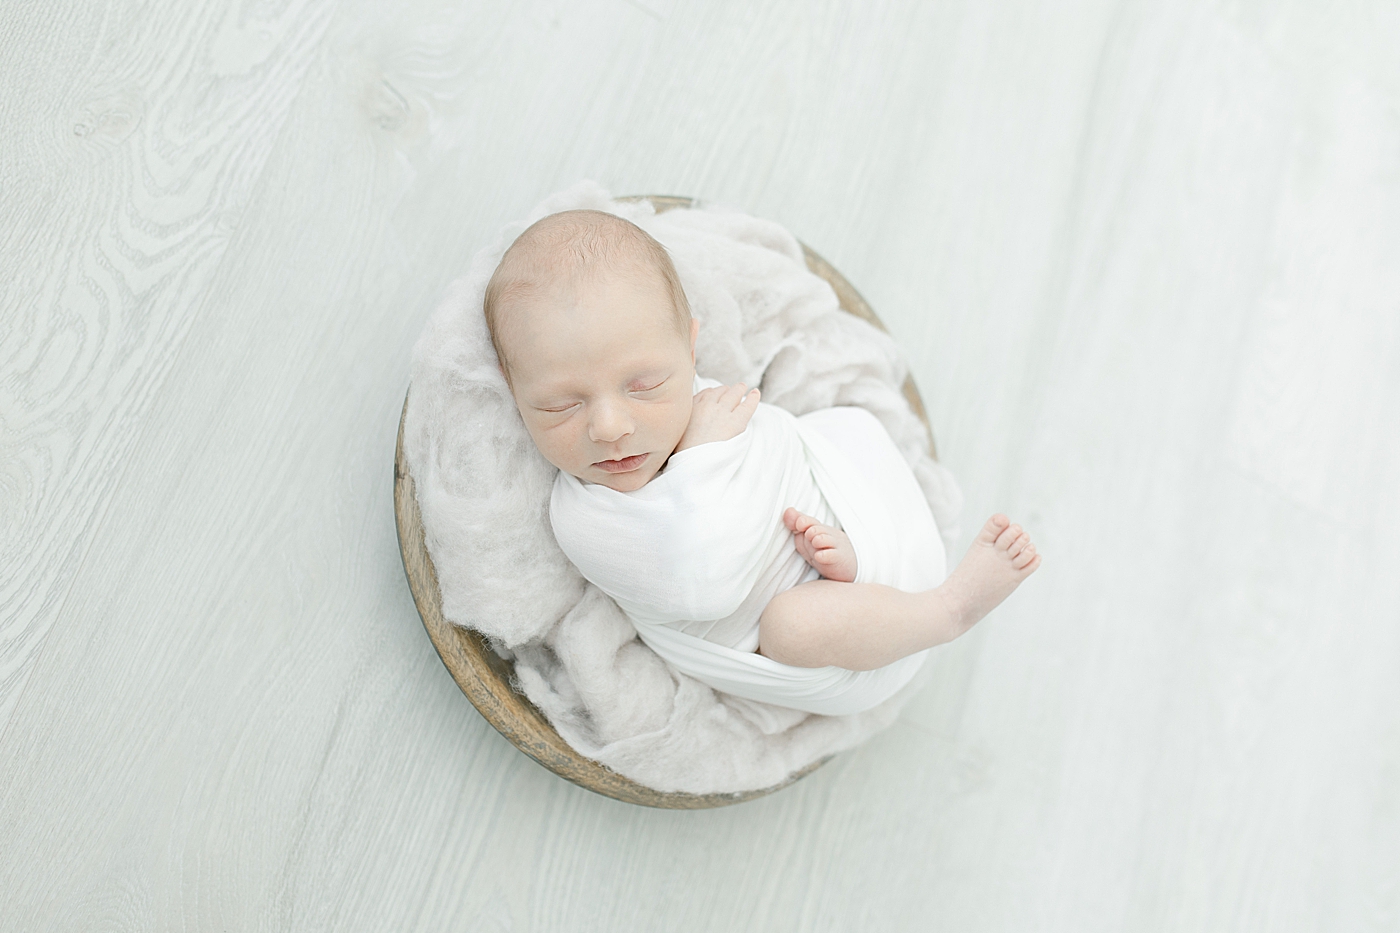 Baby boy in white swaddle in a bowl on white surface | Photo by Little Sunshine Photography